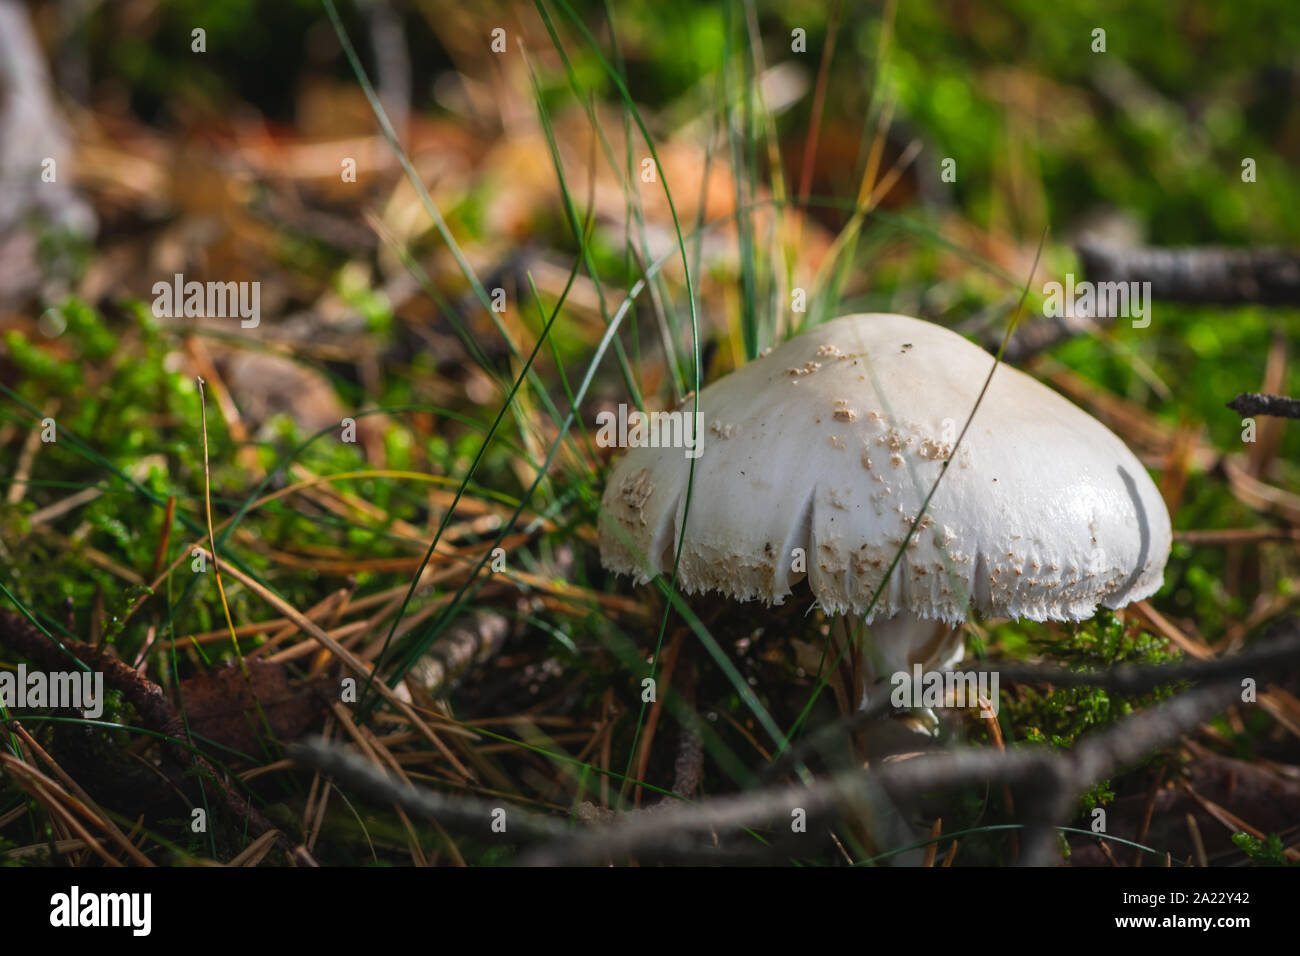 Poisonous Amanita Virosa mushroom growing in mossy forest. Stock Photo